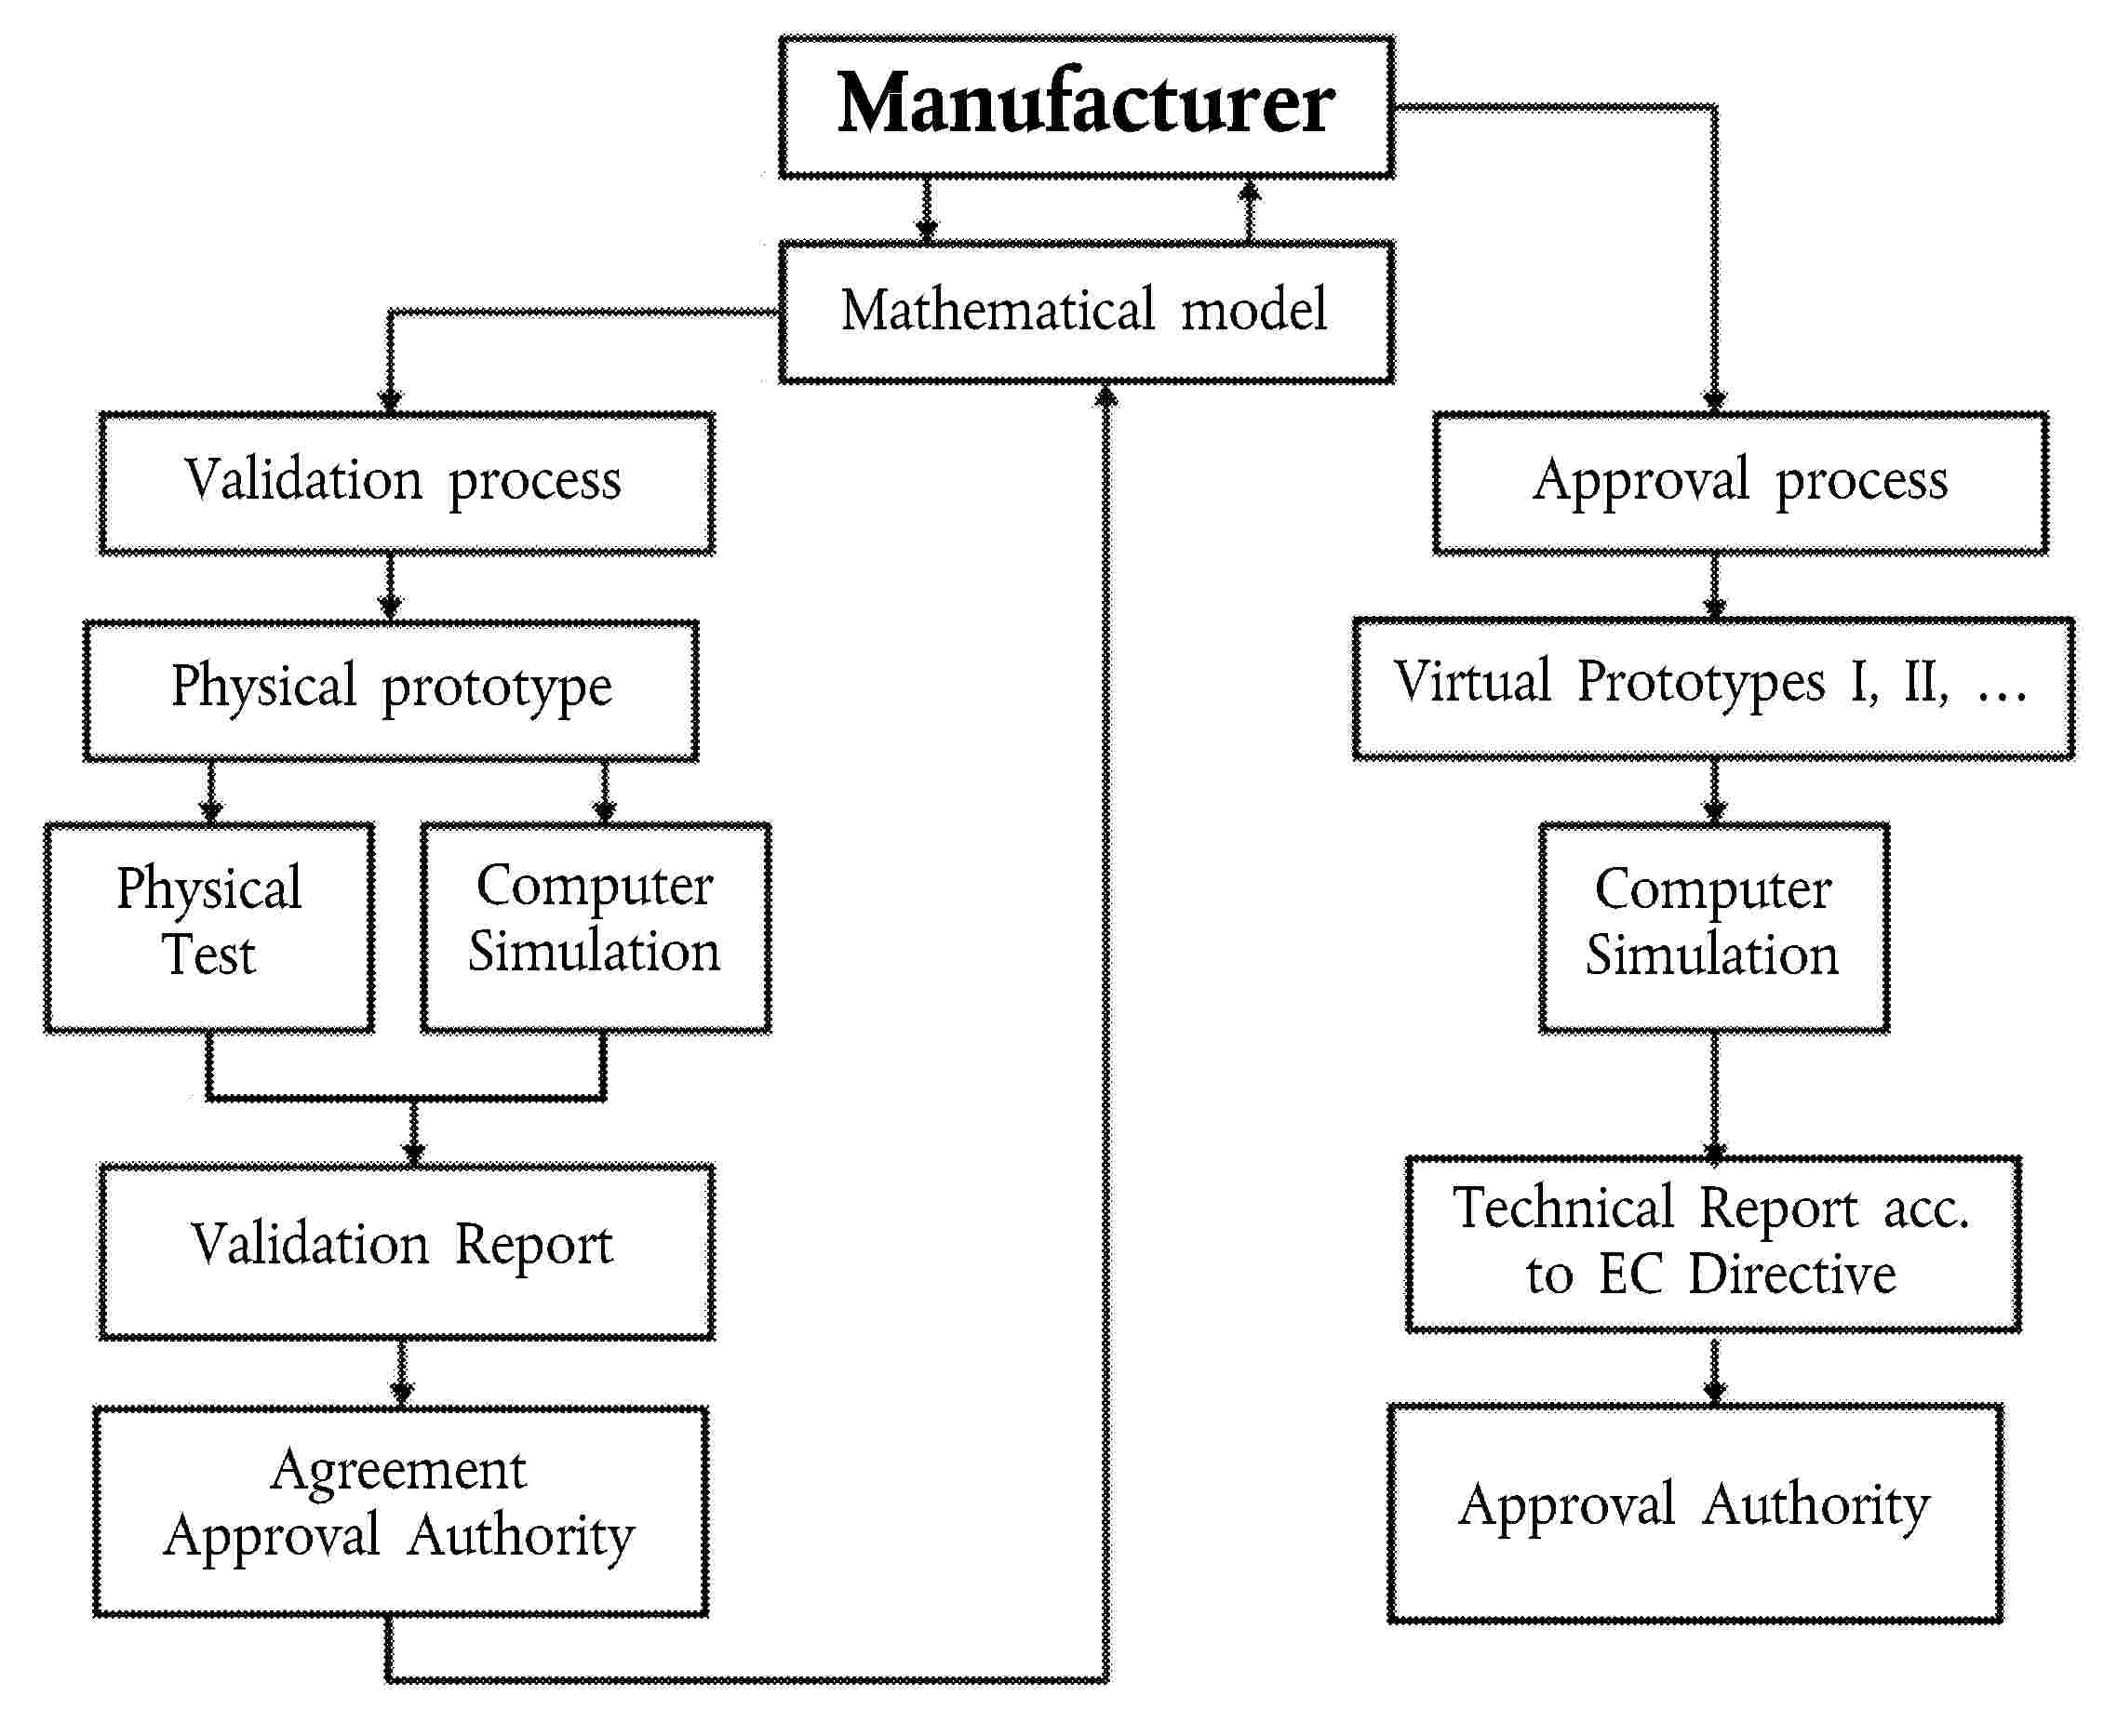 ManufacturerMathematical modelValidation processPhysical prototypePhysical TestComputer SimulationValidation ReportAgreement Approval AuthorityApproval processVirtual Prototypes I, II, …Computer SimulationTechnical Report acc. to EC DirectiveApproval Authority